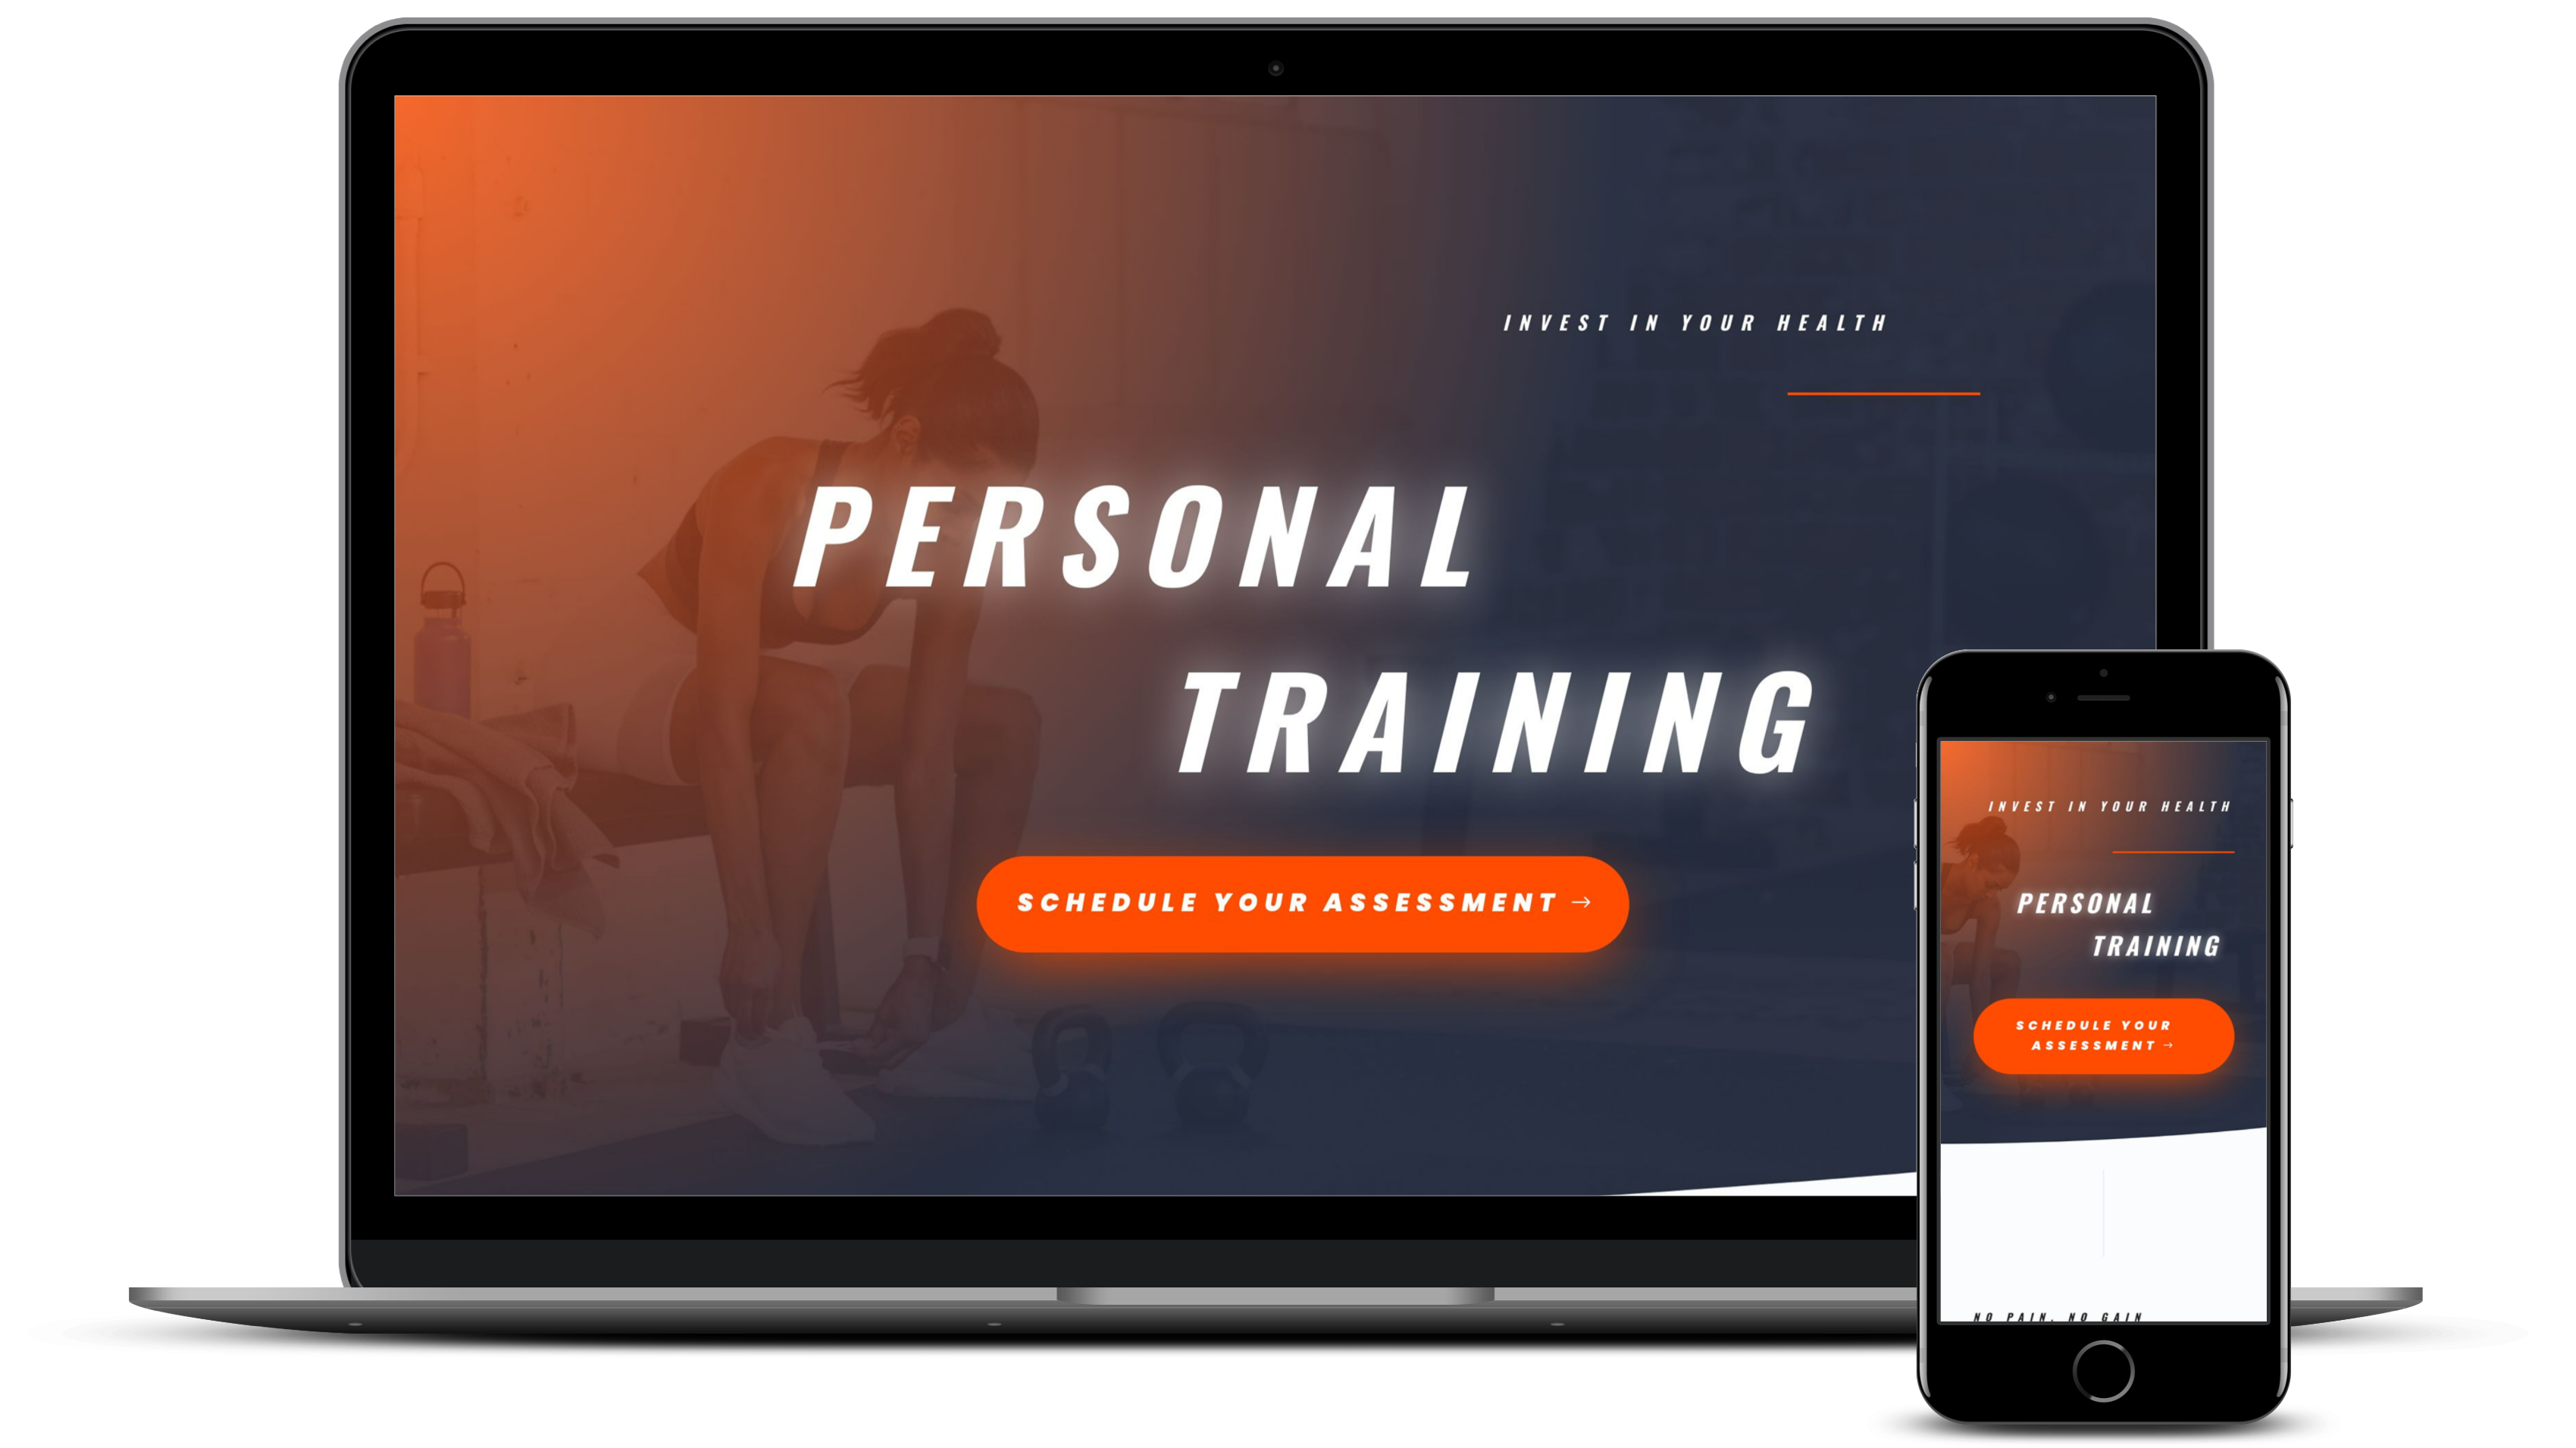 Website Design for Personal Trainers, by Nathan Ambrose.